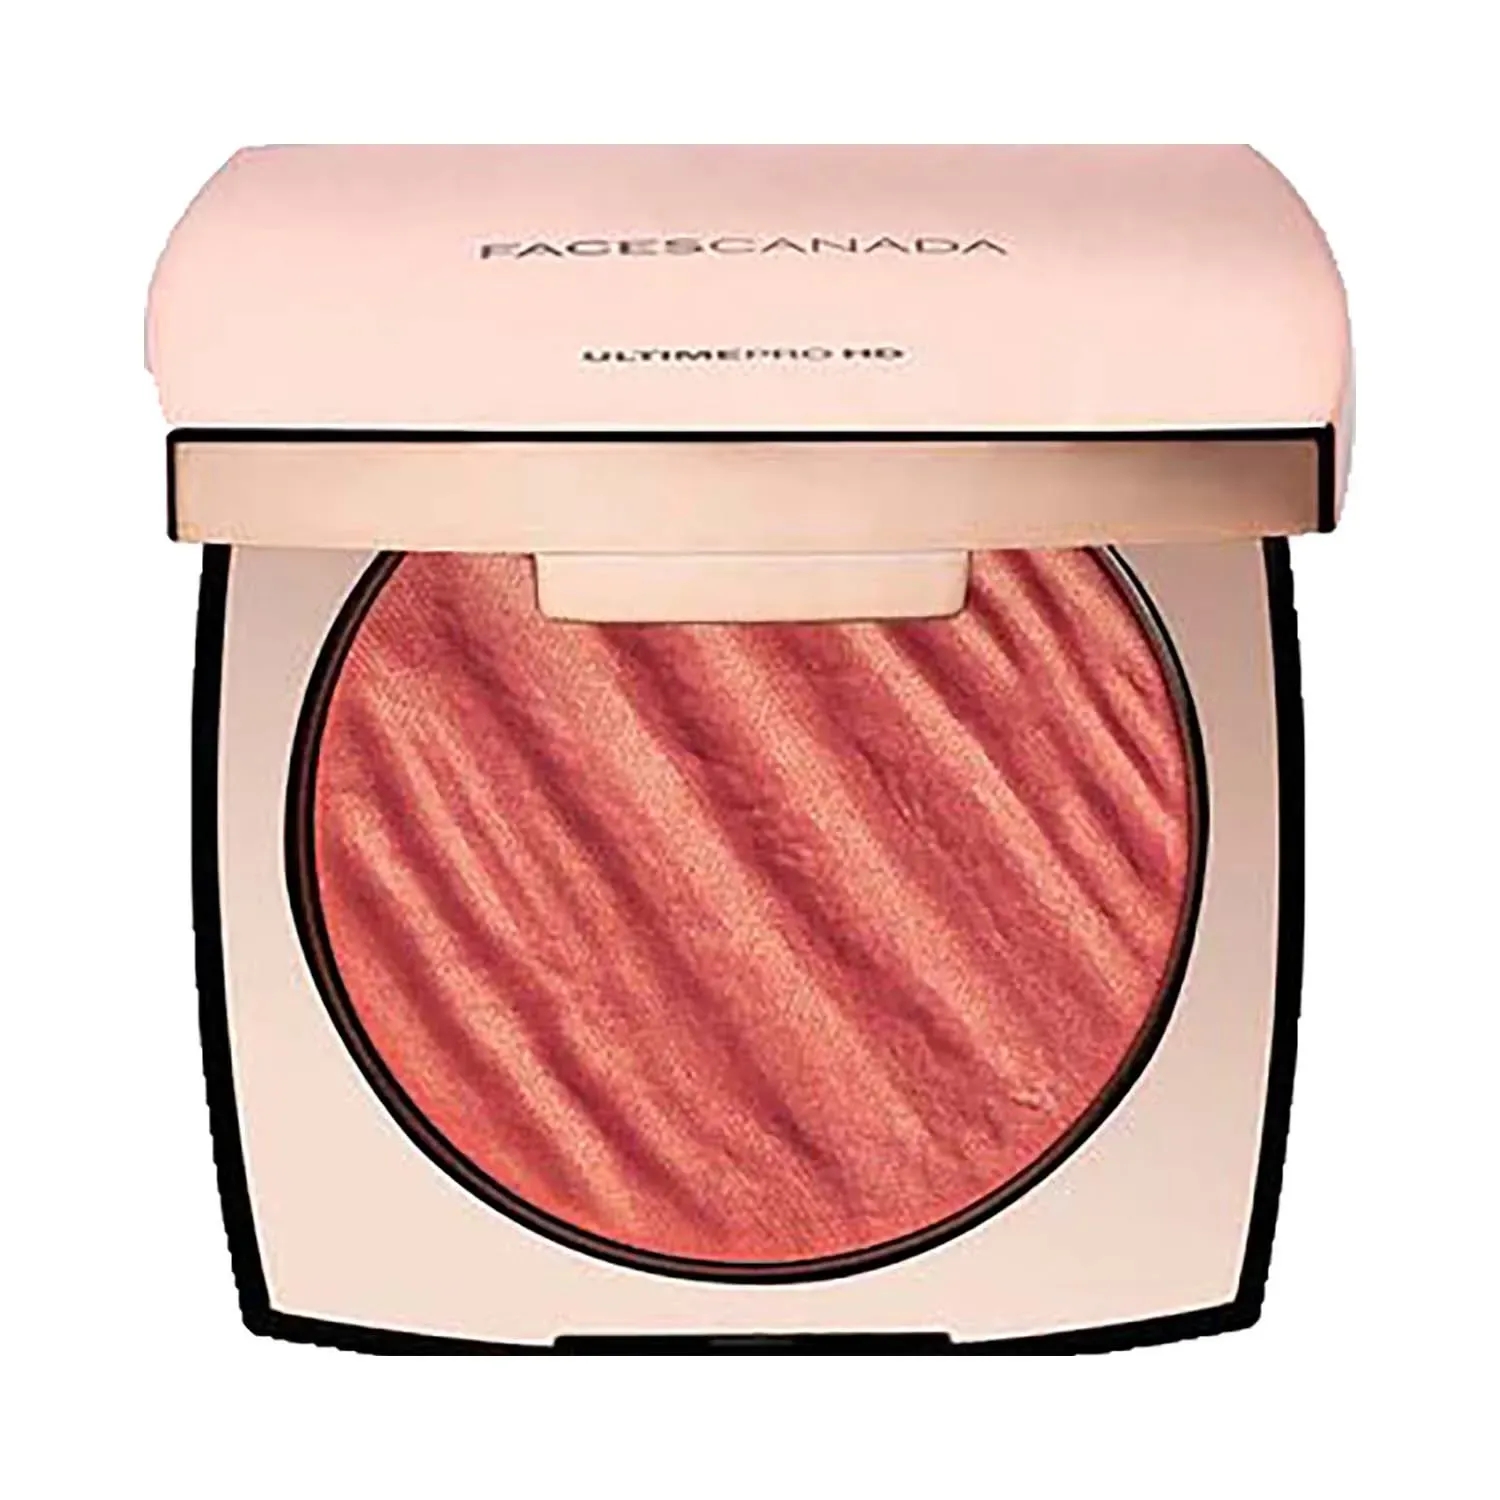 Faces Canada Ultime Pro HD Lights Camera Blush - 01 Blossom (6.5g)